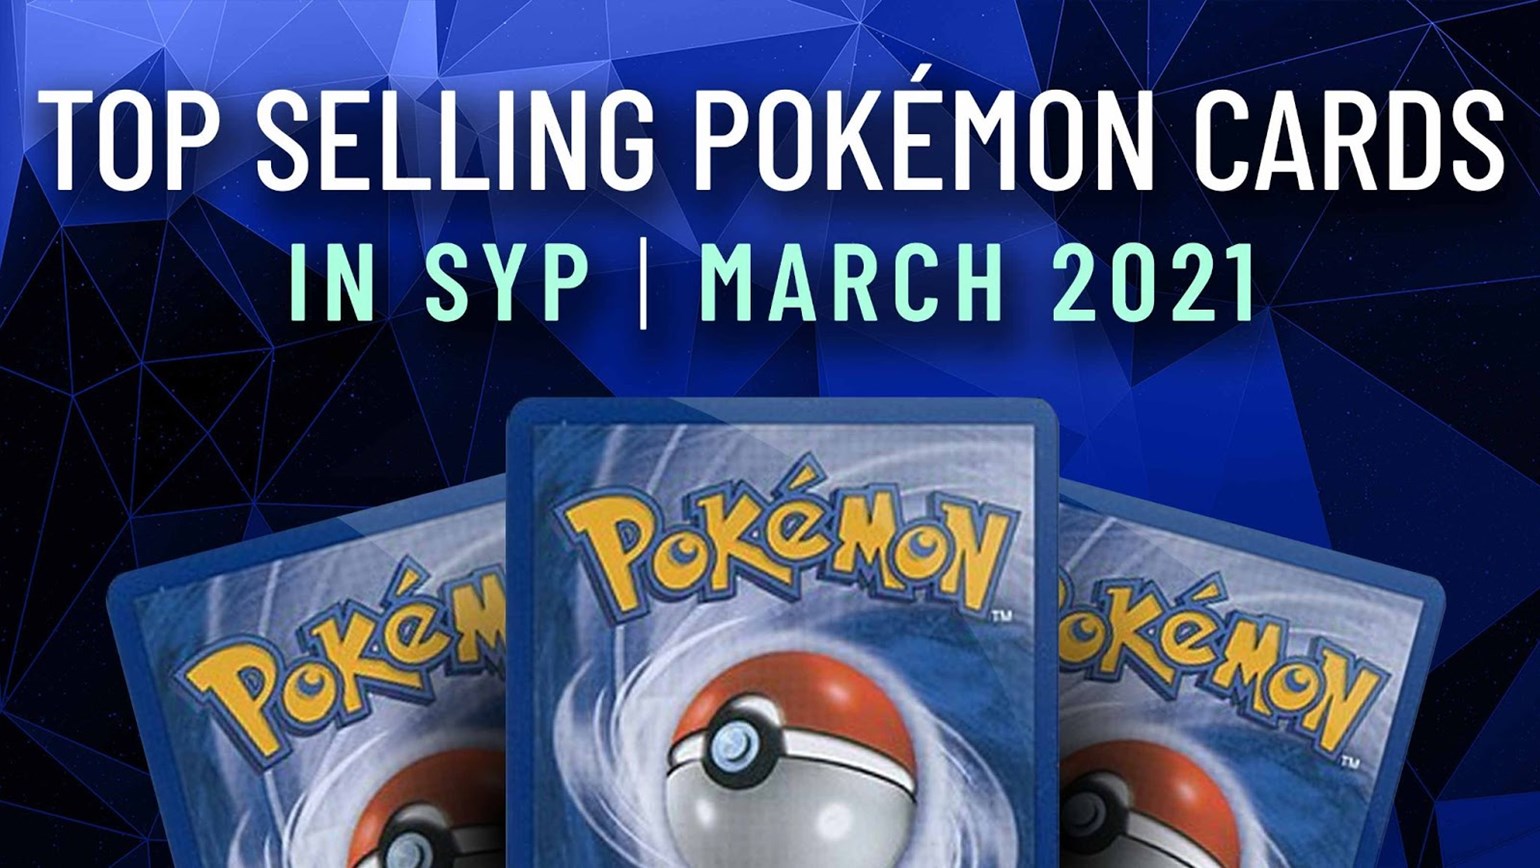 Top Selling Pokémon Cards in Store Your Products Under $100: March 2021